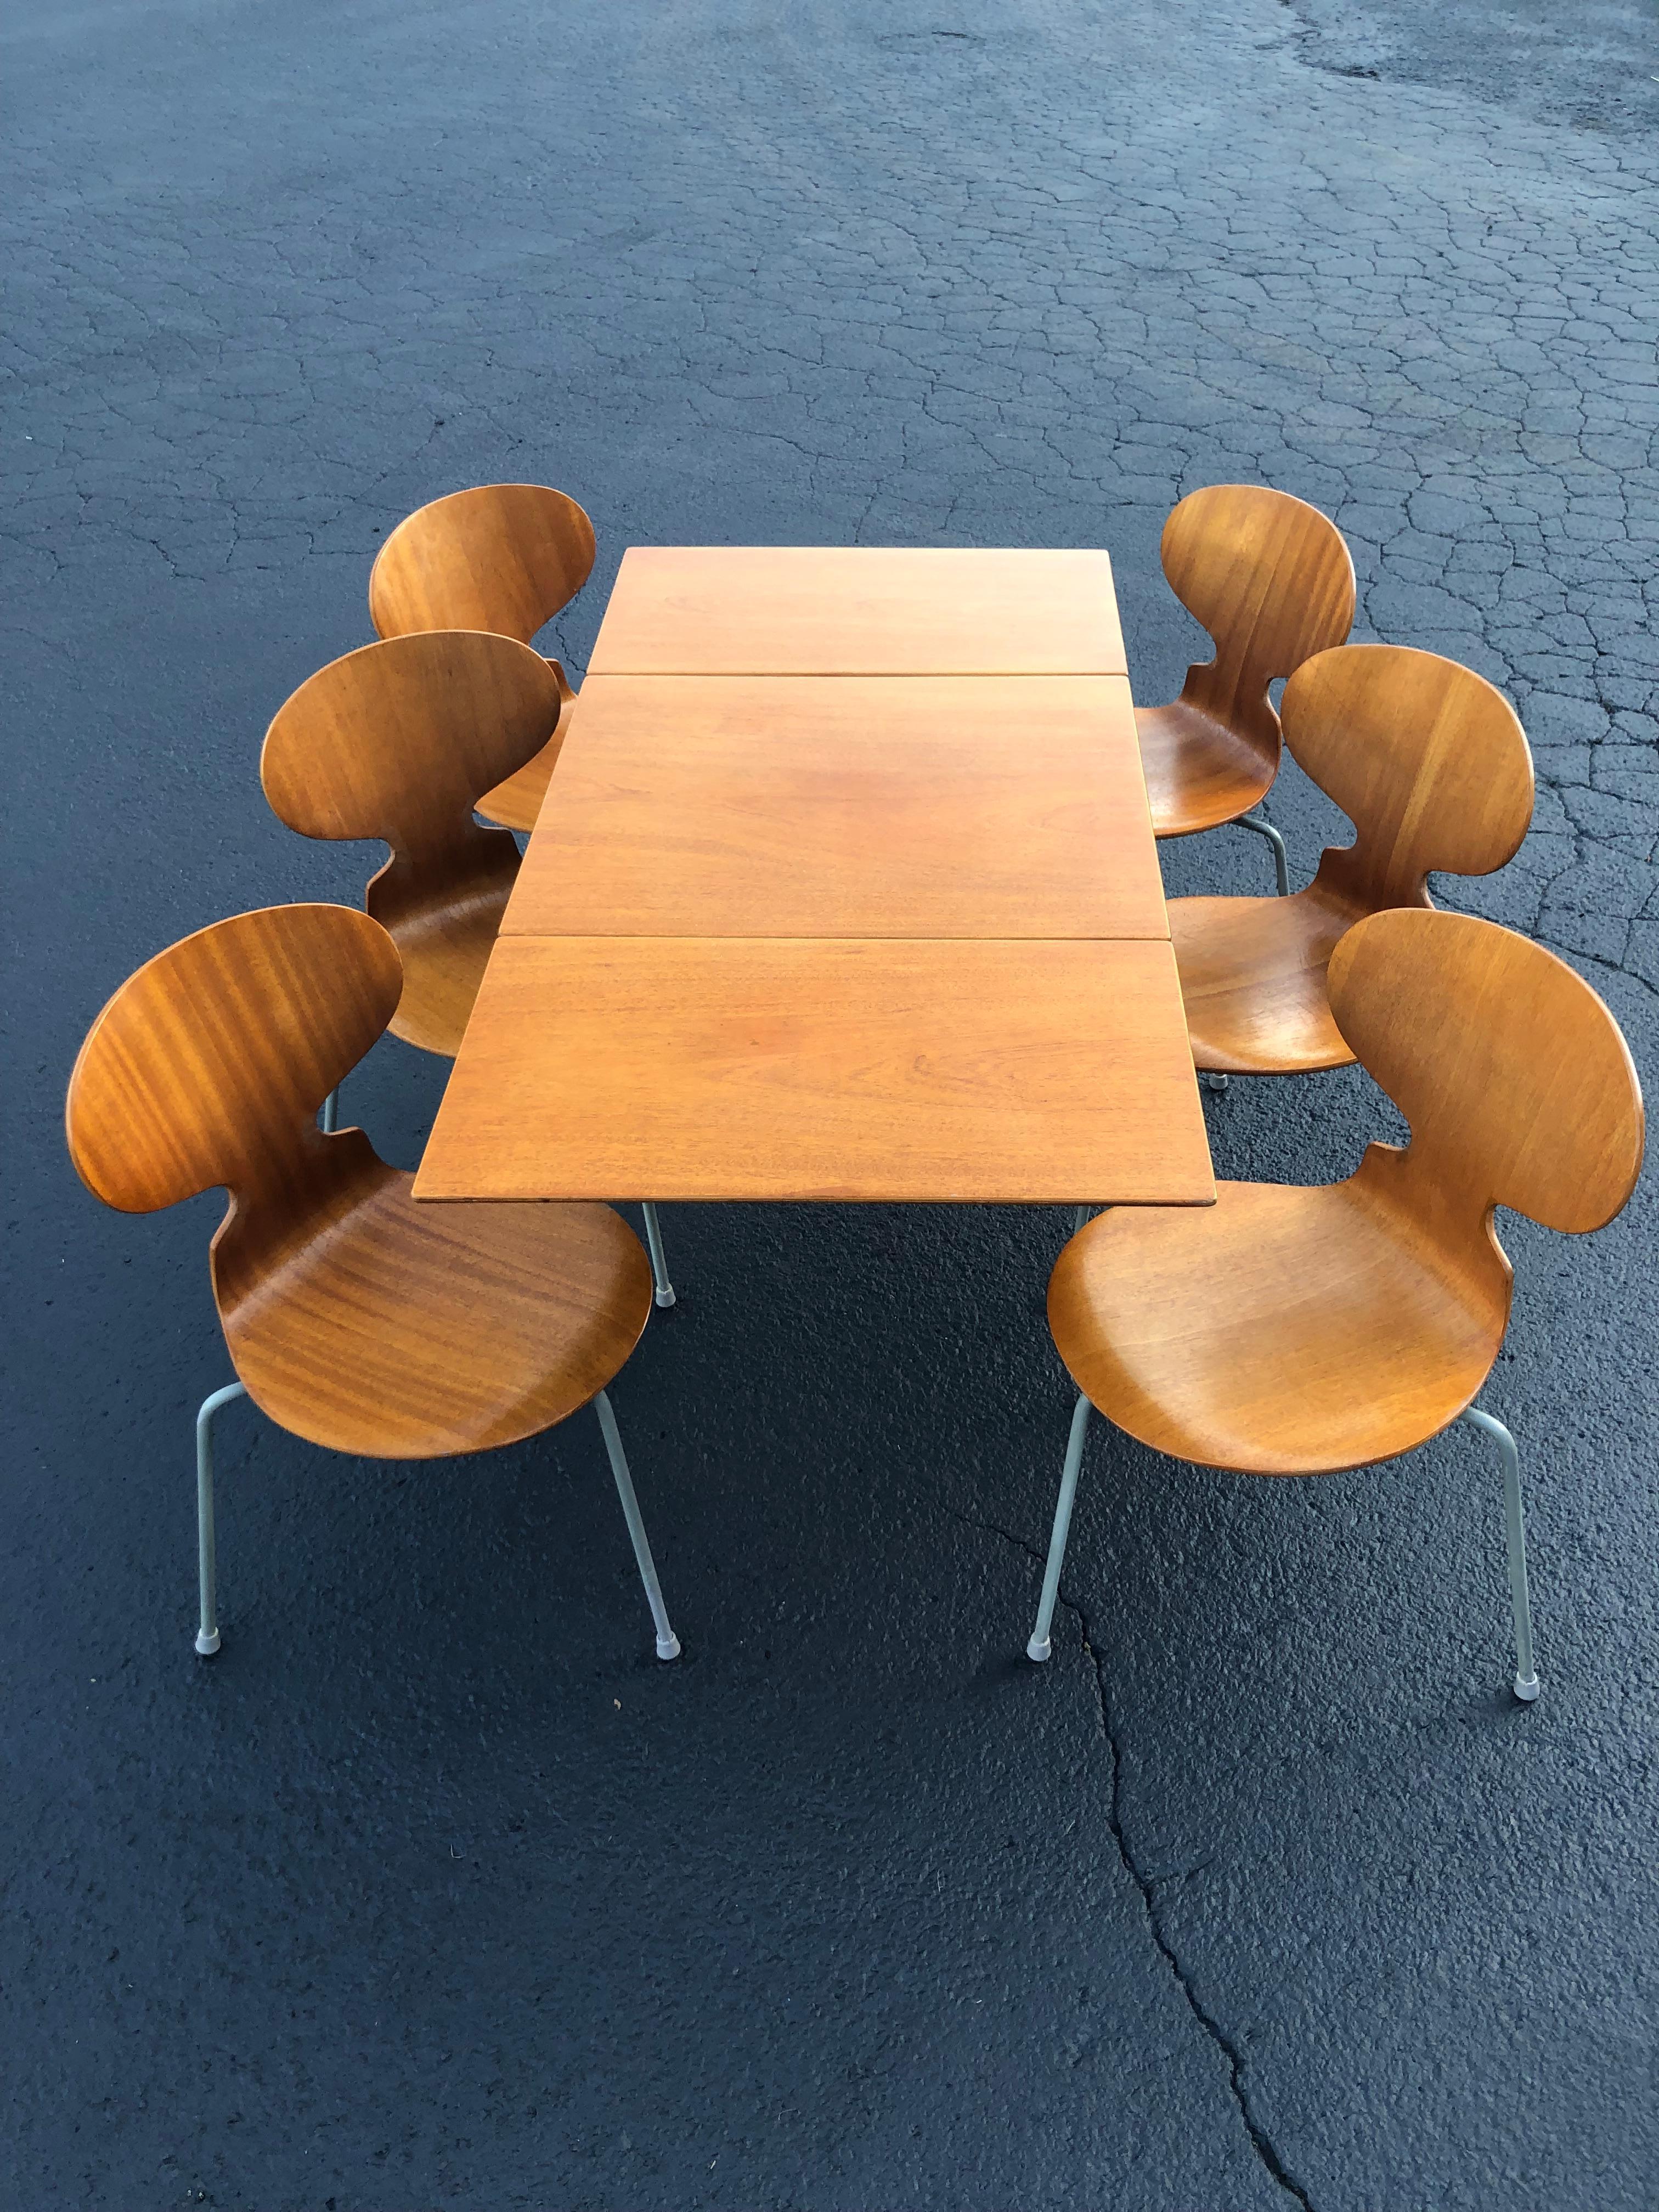 Rare set of six Arne Jacobsen Ant chairs Model #3100 with matching drop-leaf table. Manufactured by Fritz Hansen, 1950s label. Table has custom piece glass top if desired. Table measures: 27.50 D x 55 W x 27.25 H. Small flea bite chip to one corner